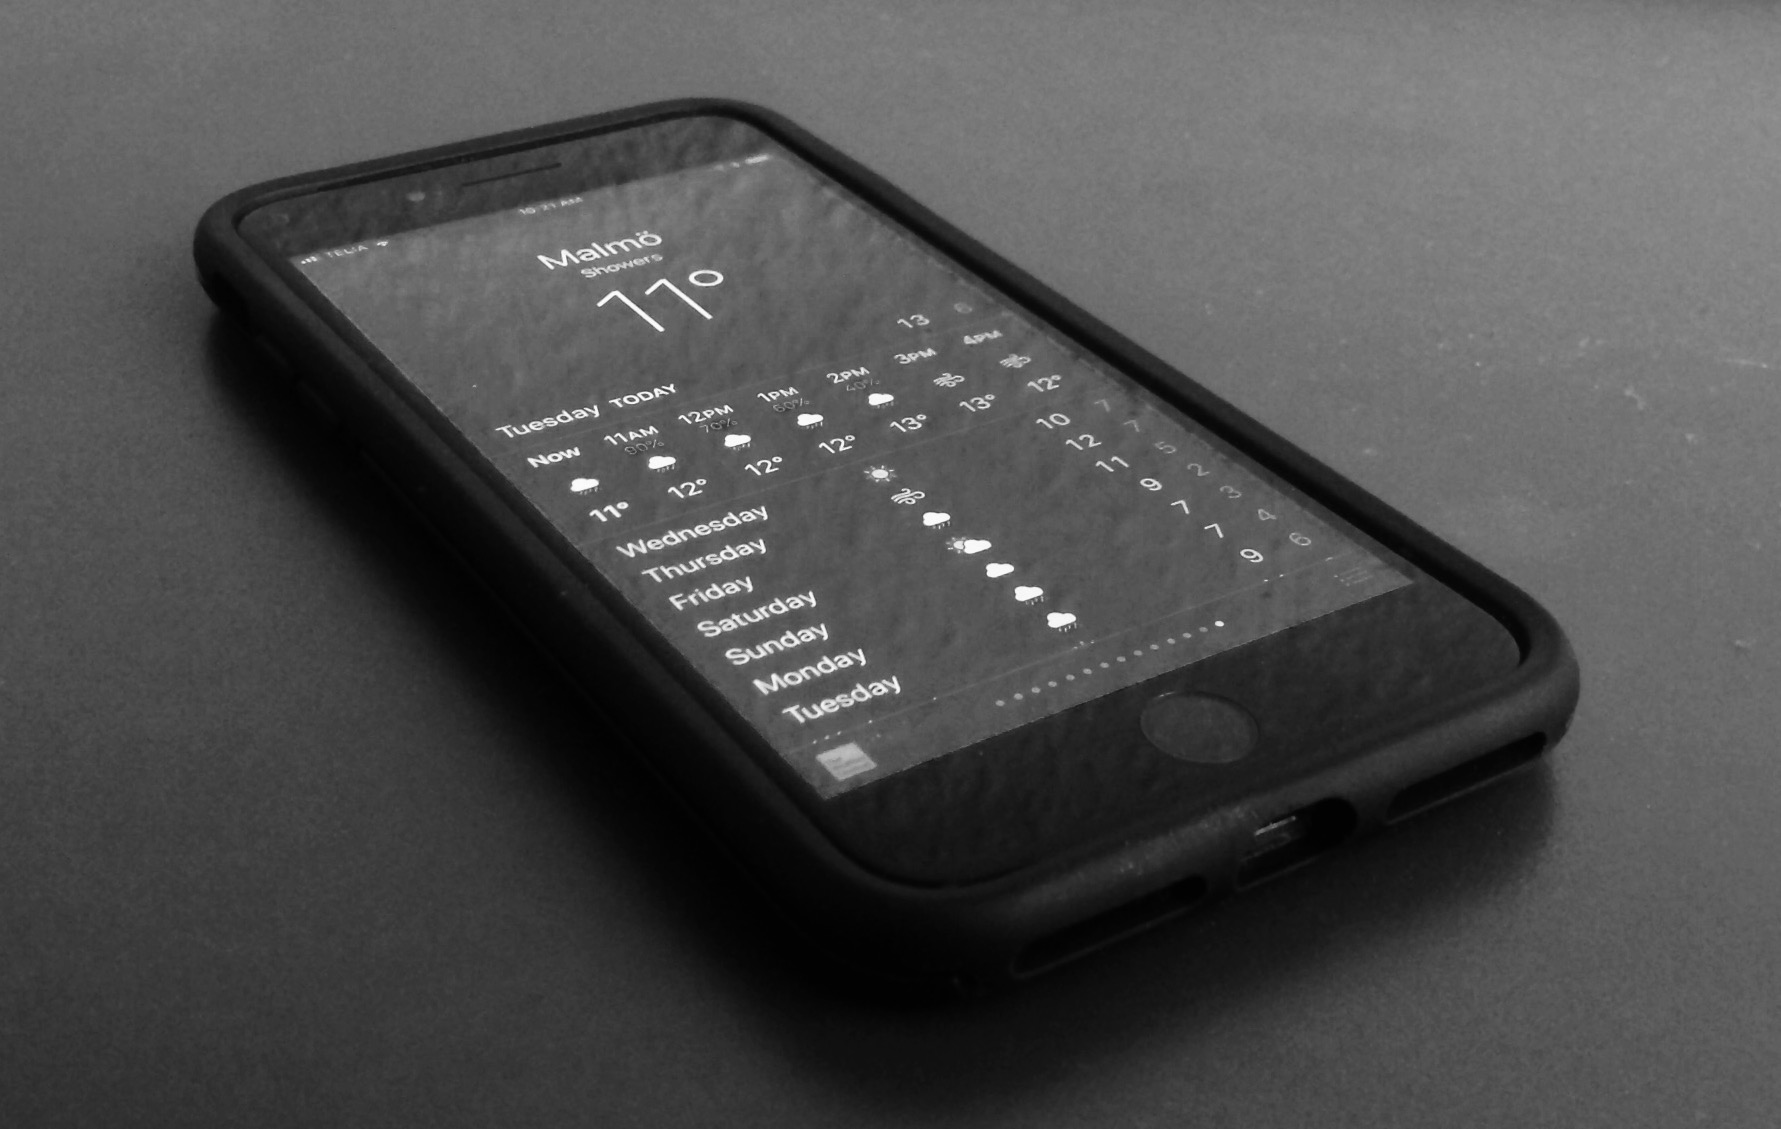 Black and white photo of a smart phone screen